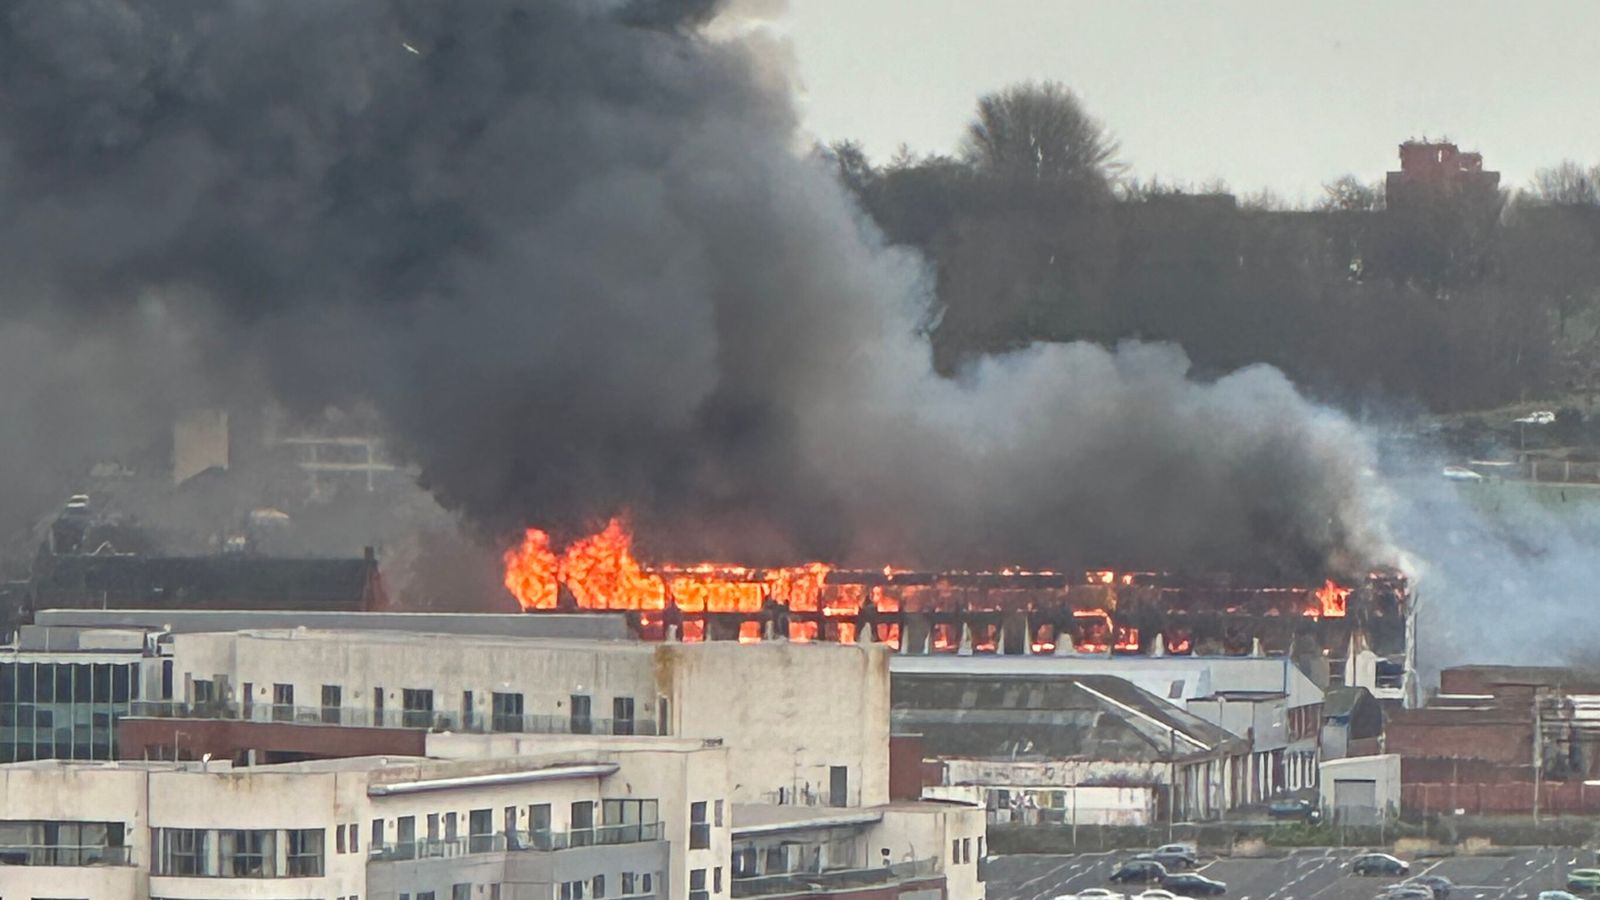 Liverpool fire: Major incident declared as large building 'showing signs of collapse'